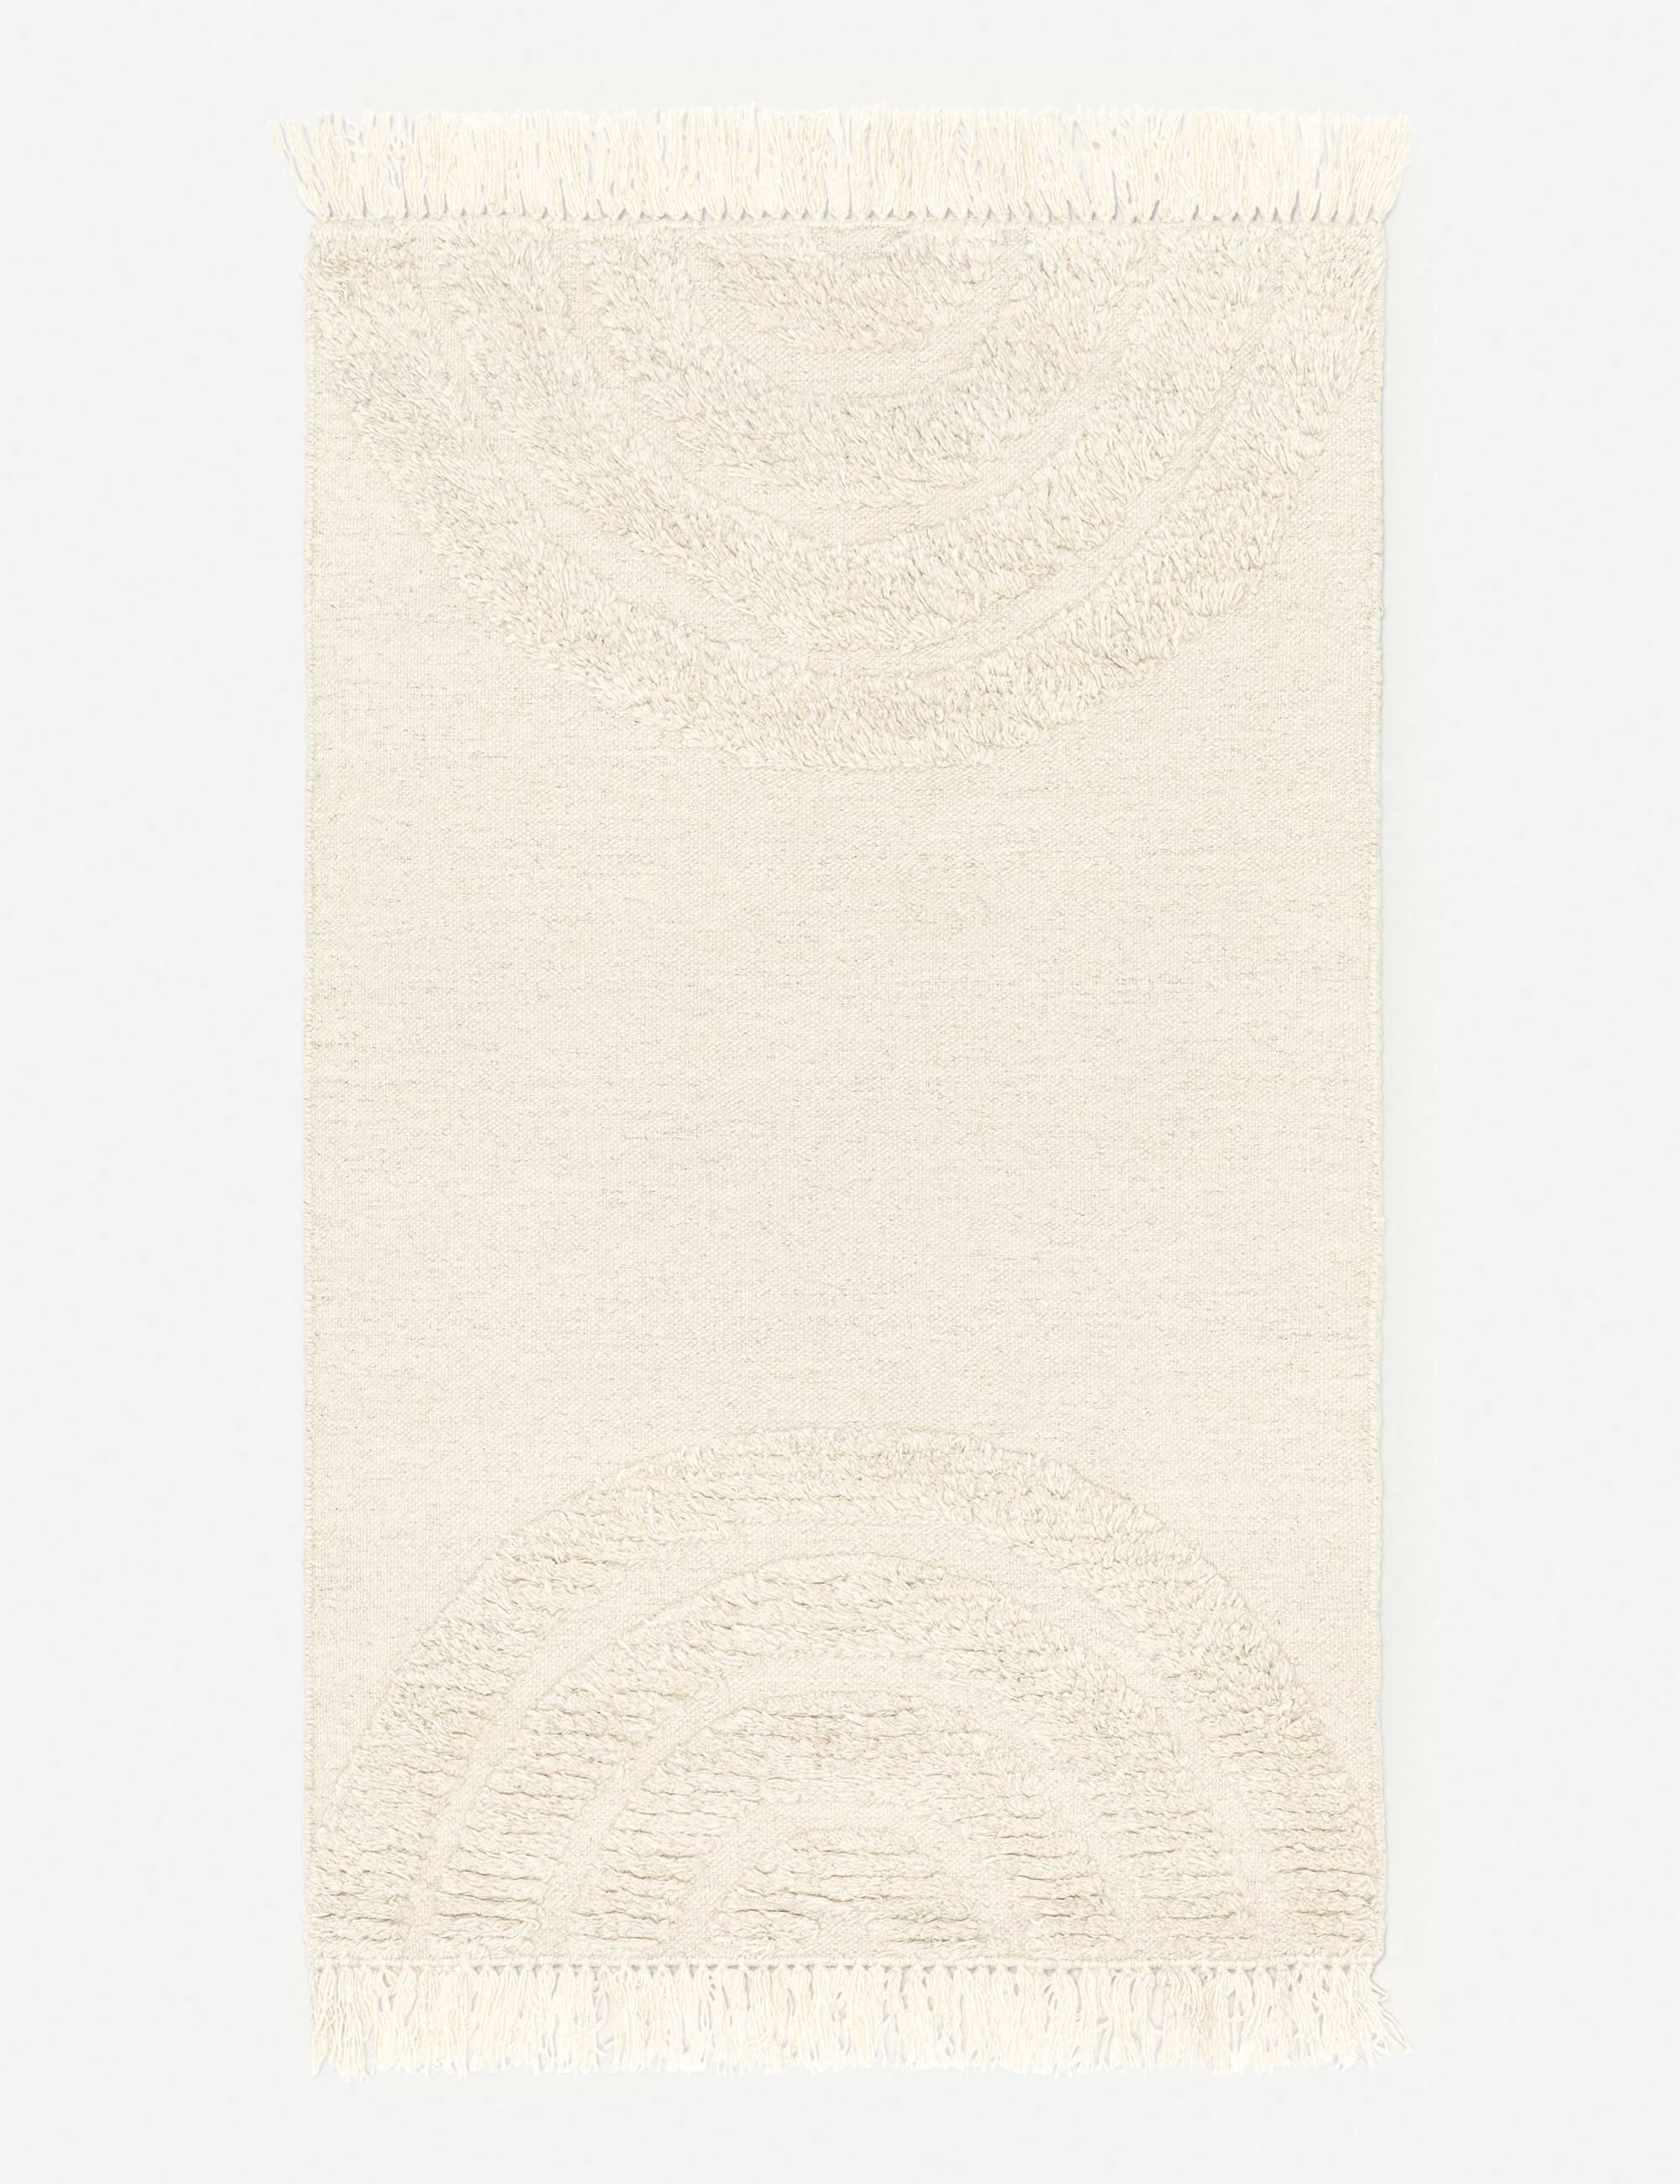 Arches Hand-Knotted Wool Rug by Sarah Sherman Samuel - Image 15